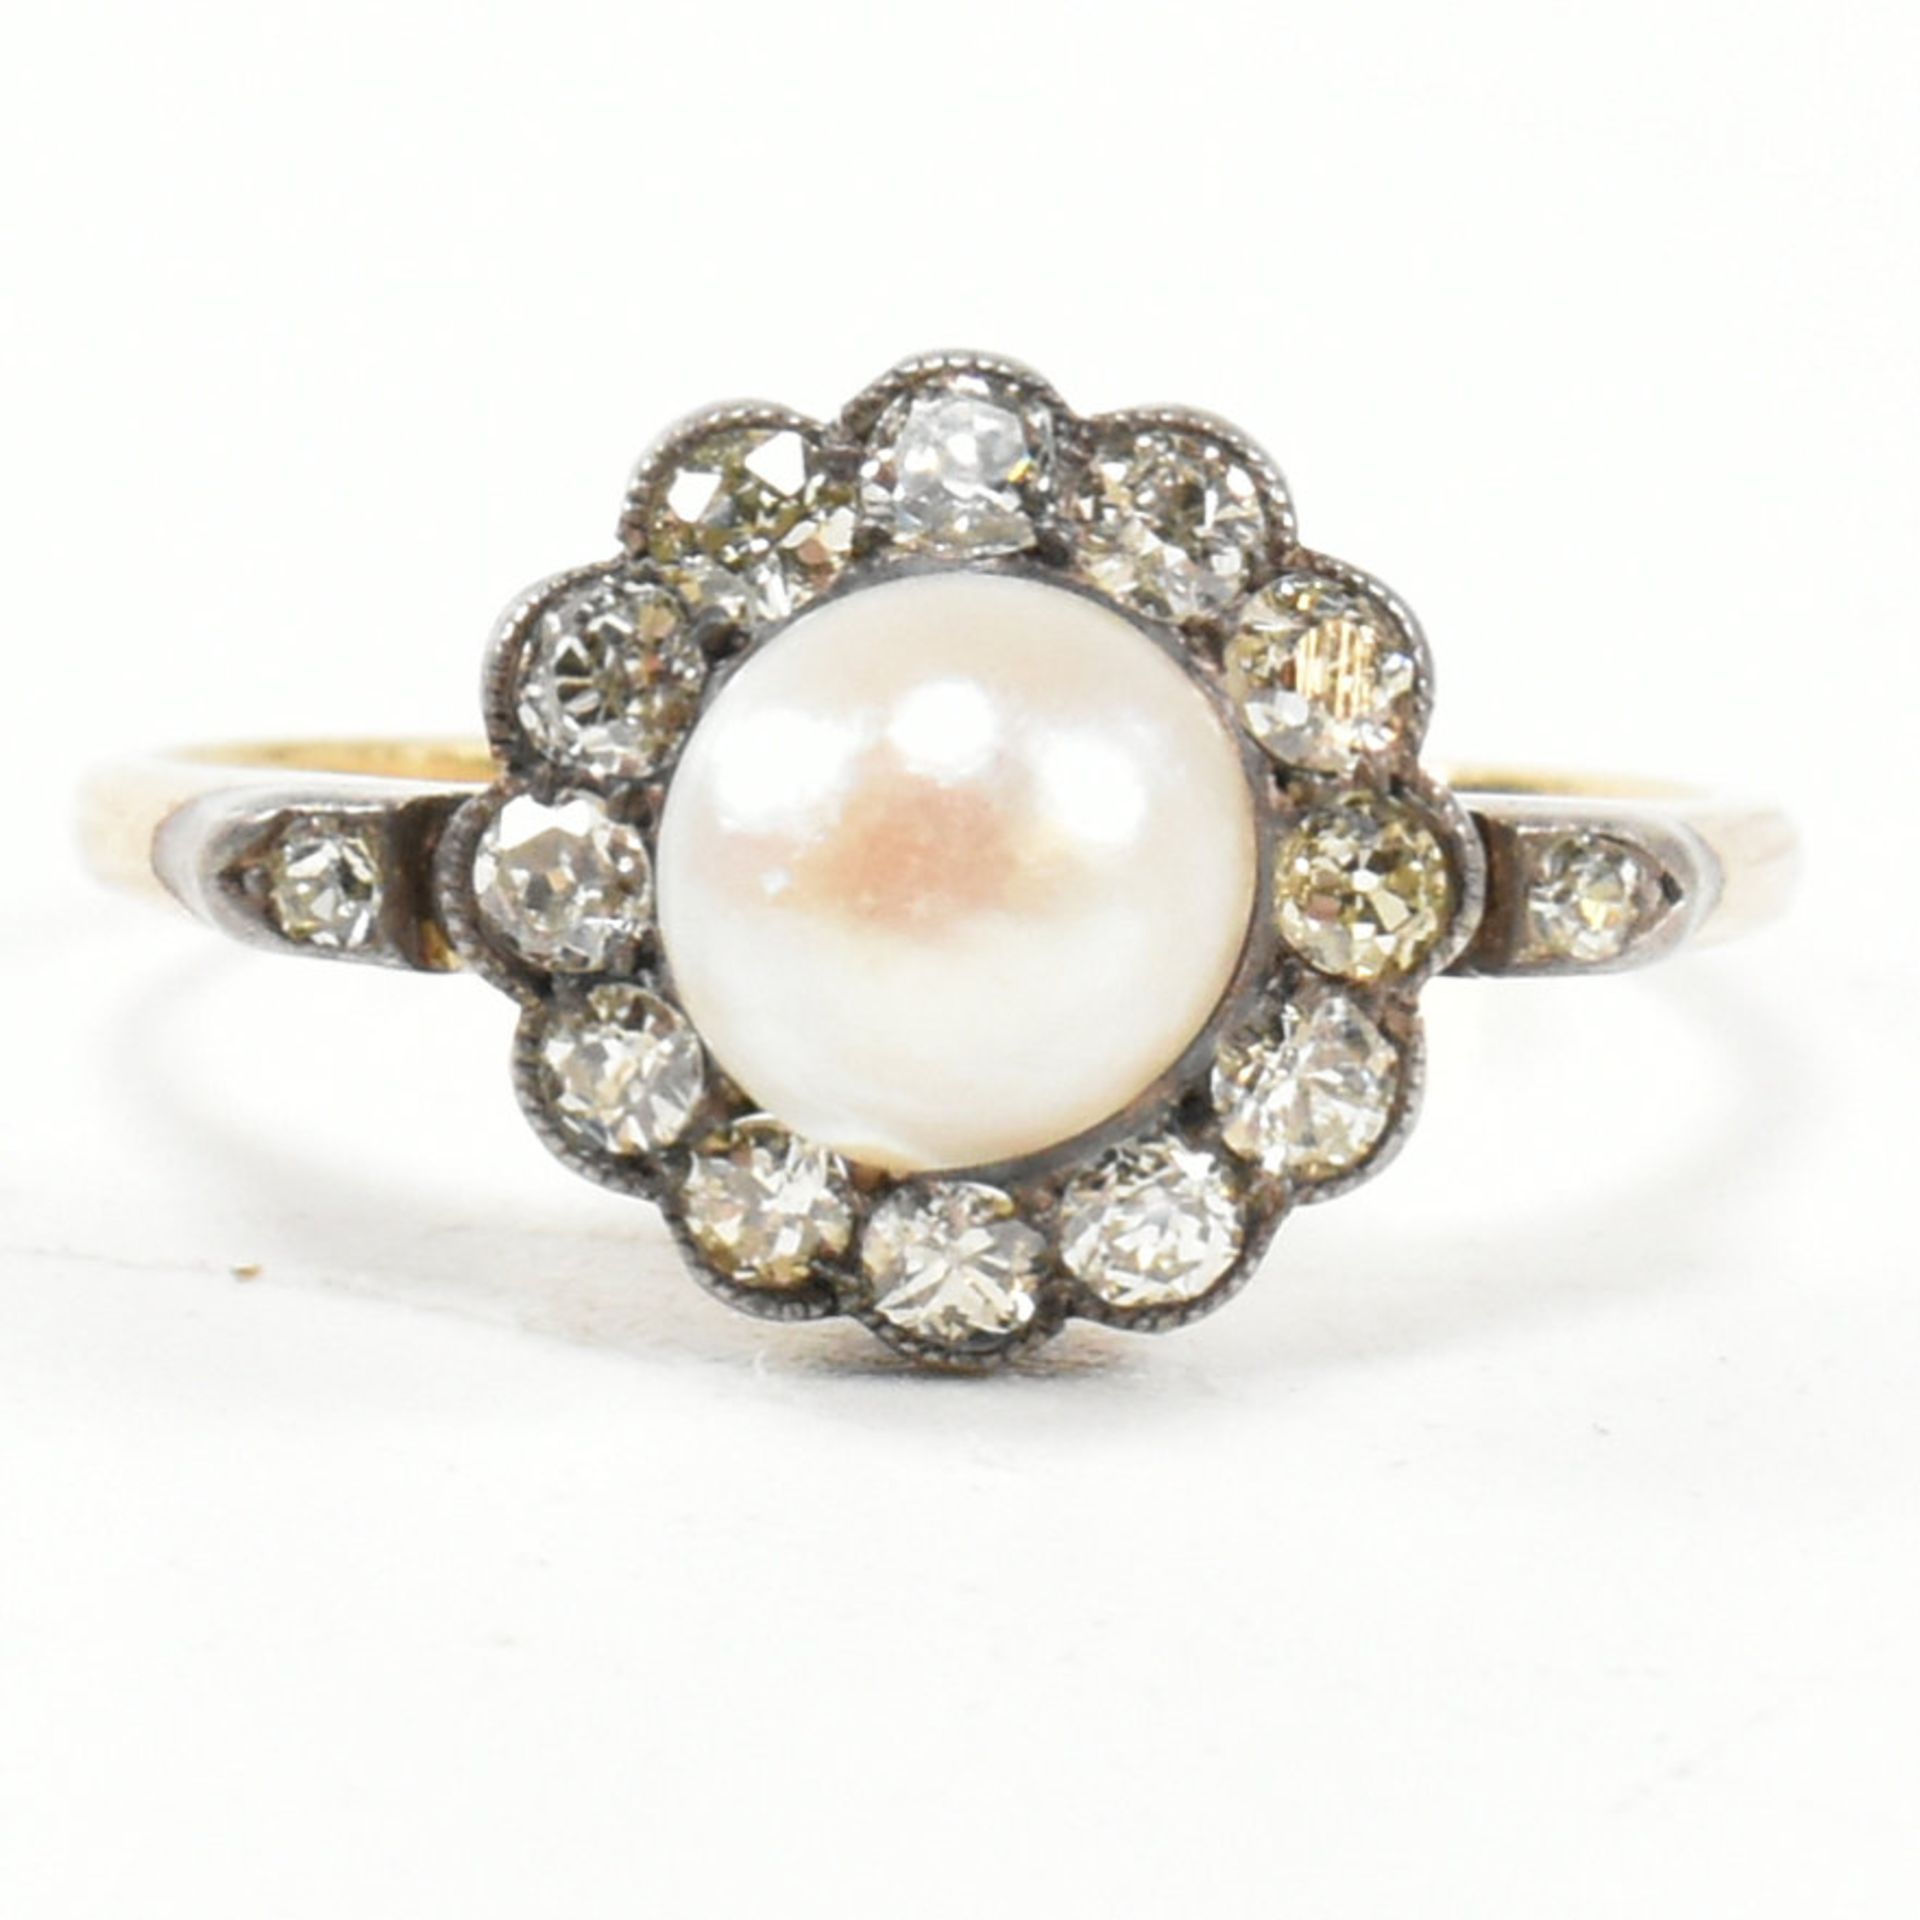 EARLY 20TH CENTURY PEARL & DIAMOND CLUSTER RING